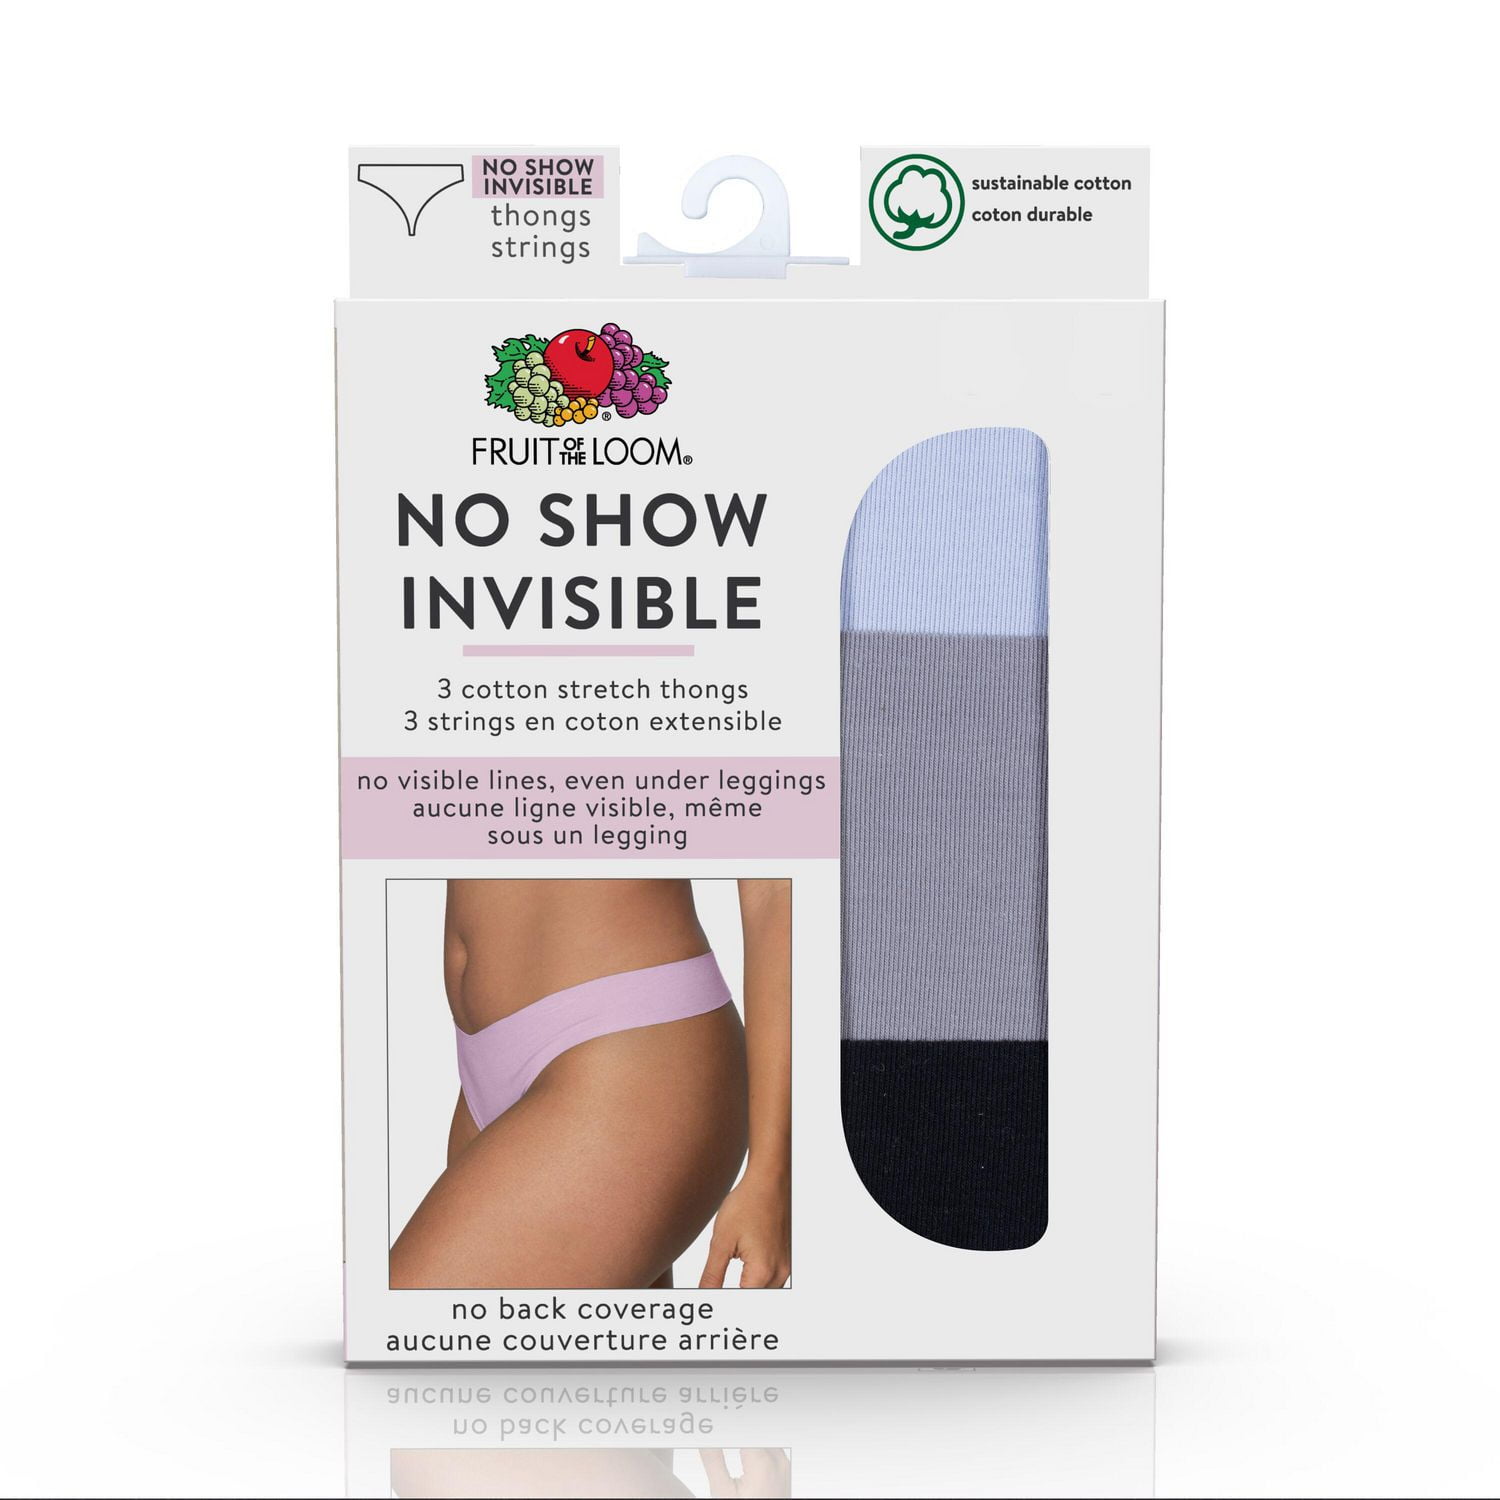 The Best No-Show Underwear for People Who Hate Thongs